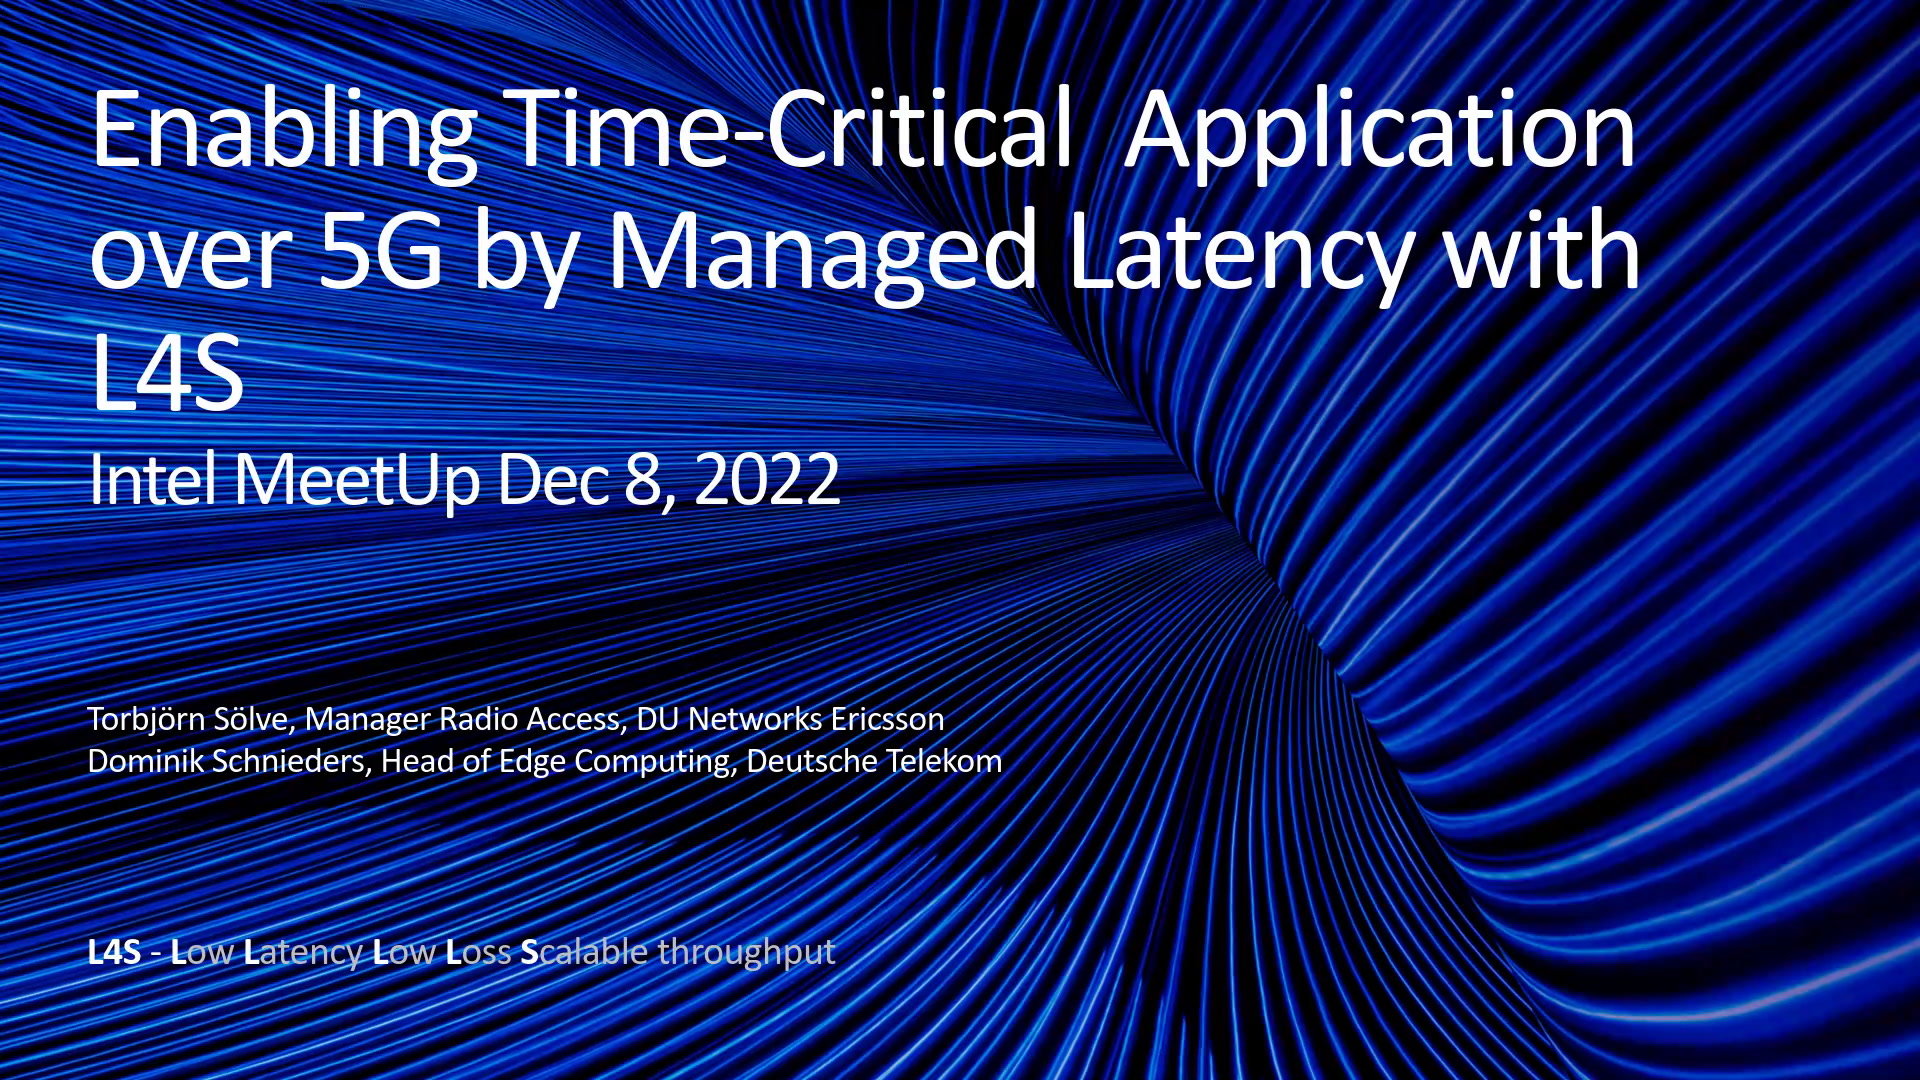 Enabling Time-Critical Application Over 5G by “Managed Latency with L4S”